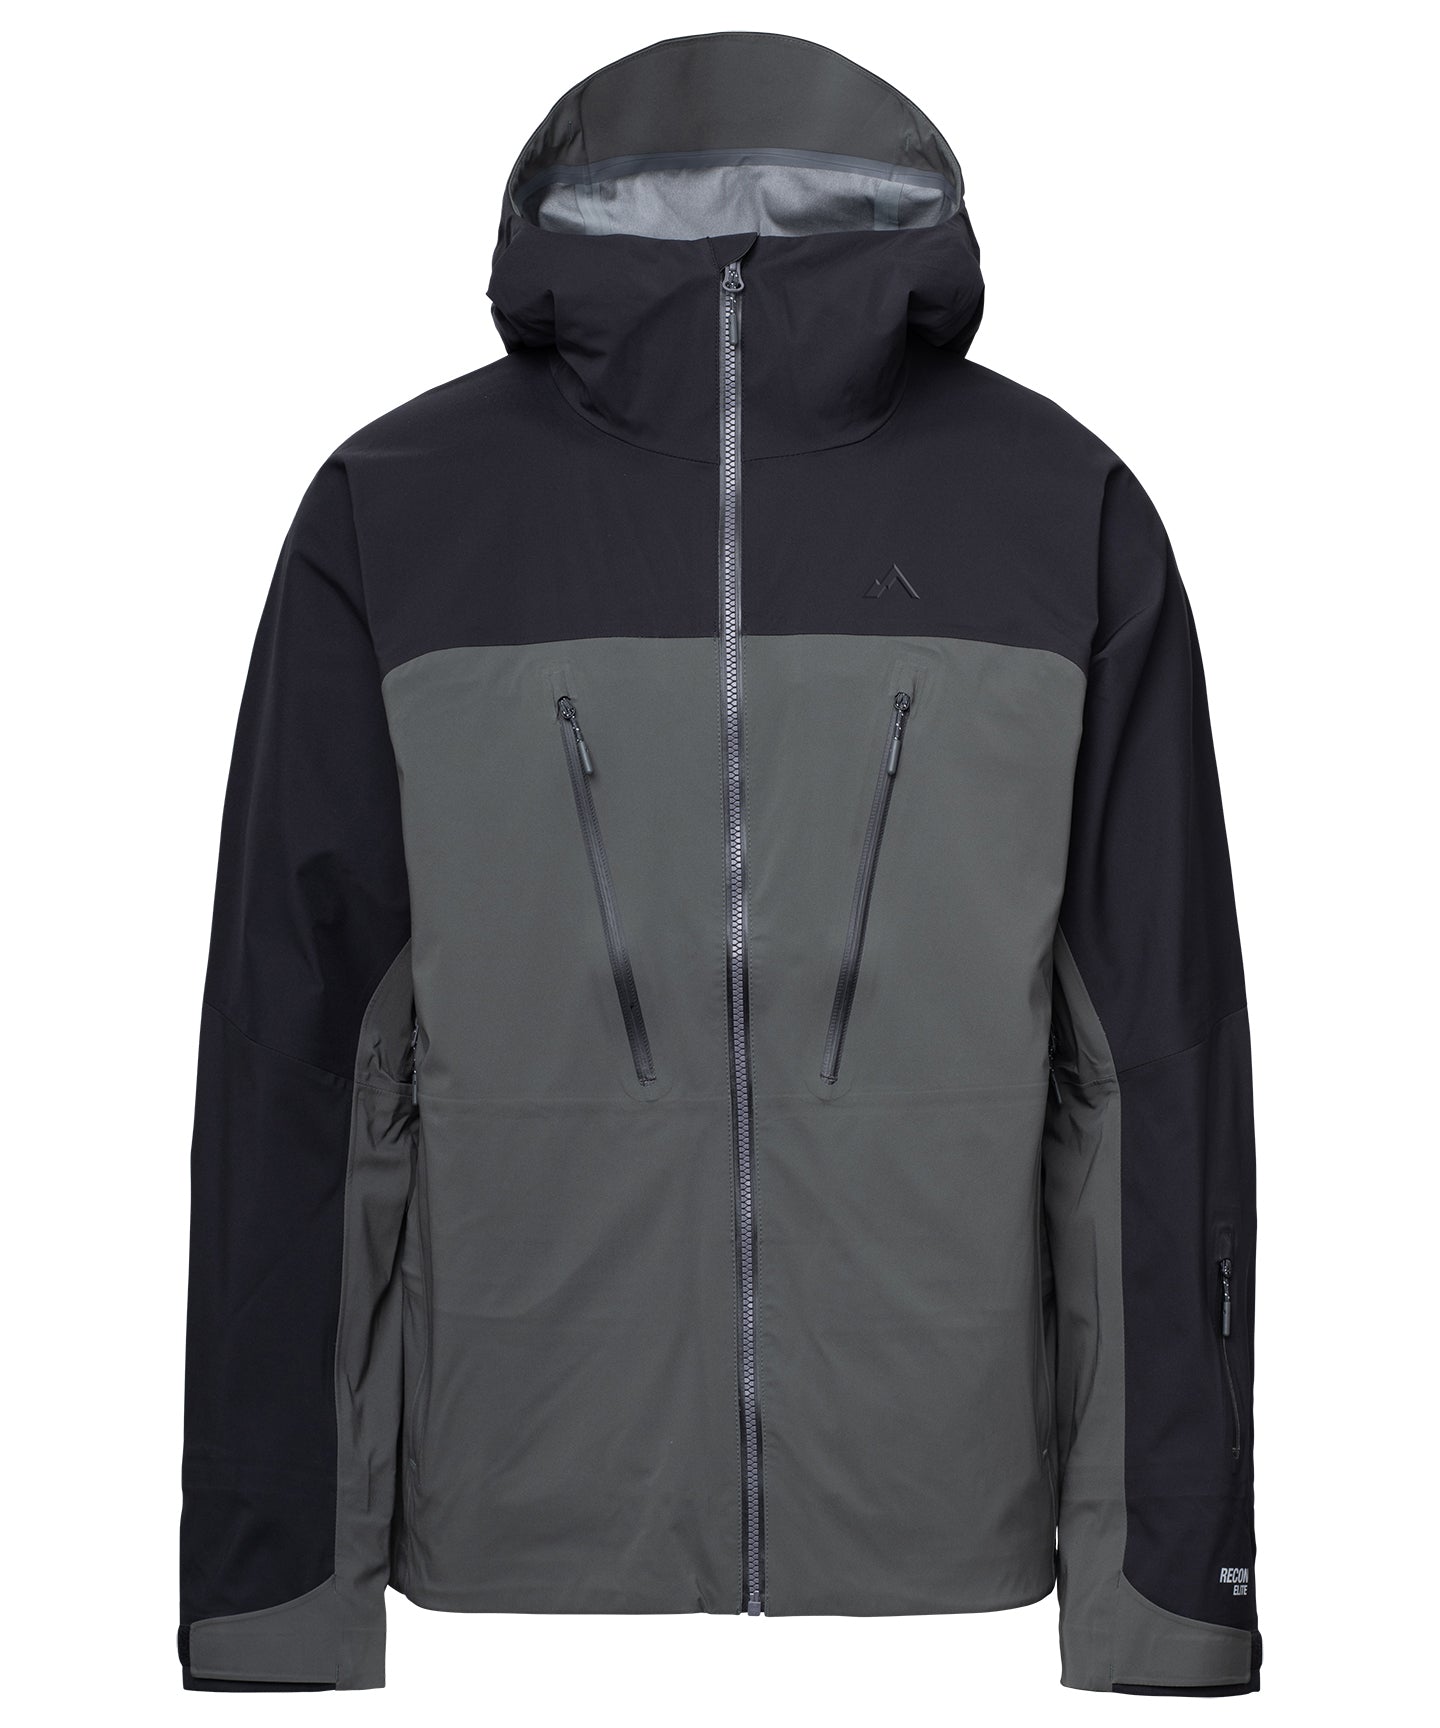 strafe outerwear fall/winter 23/24 collection mens pyramid jacket in charcoal